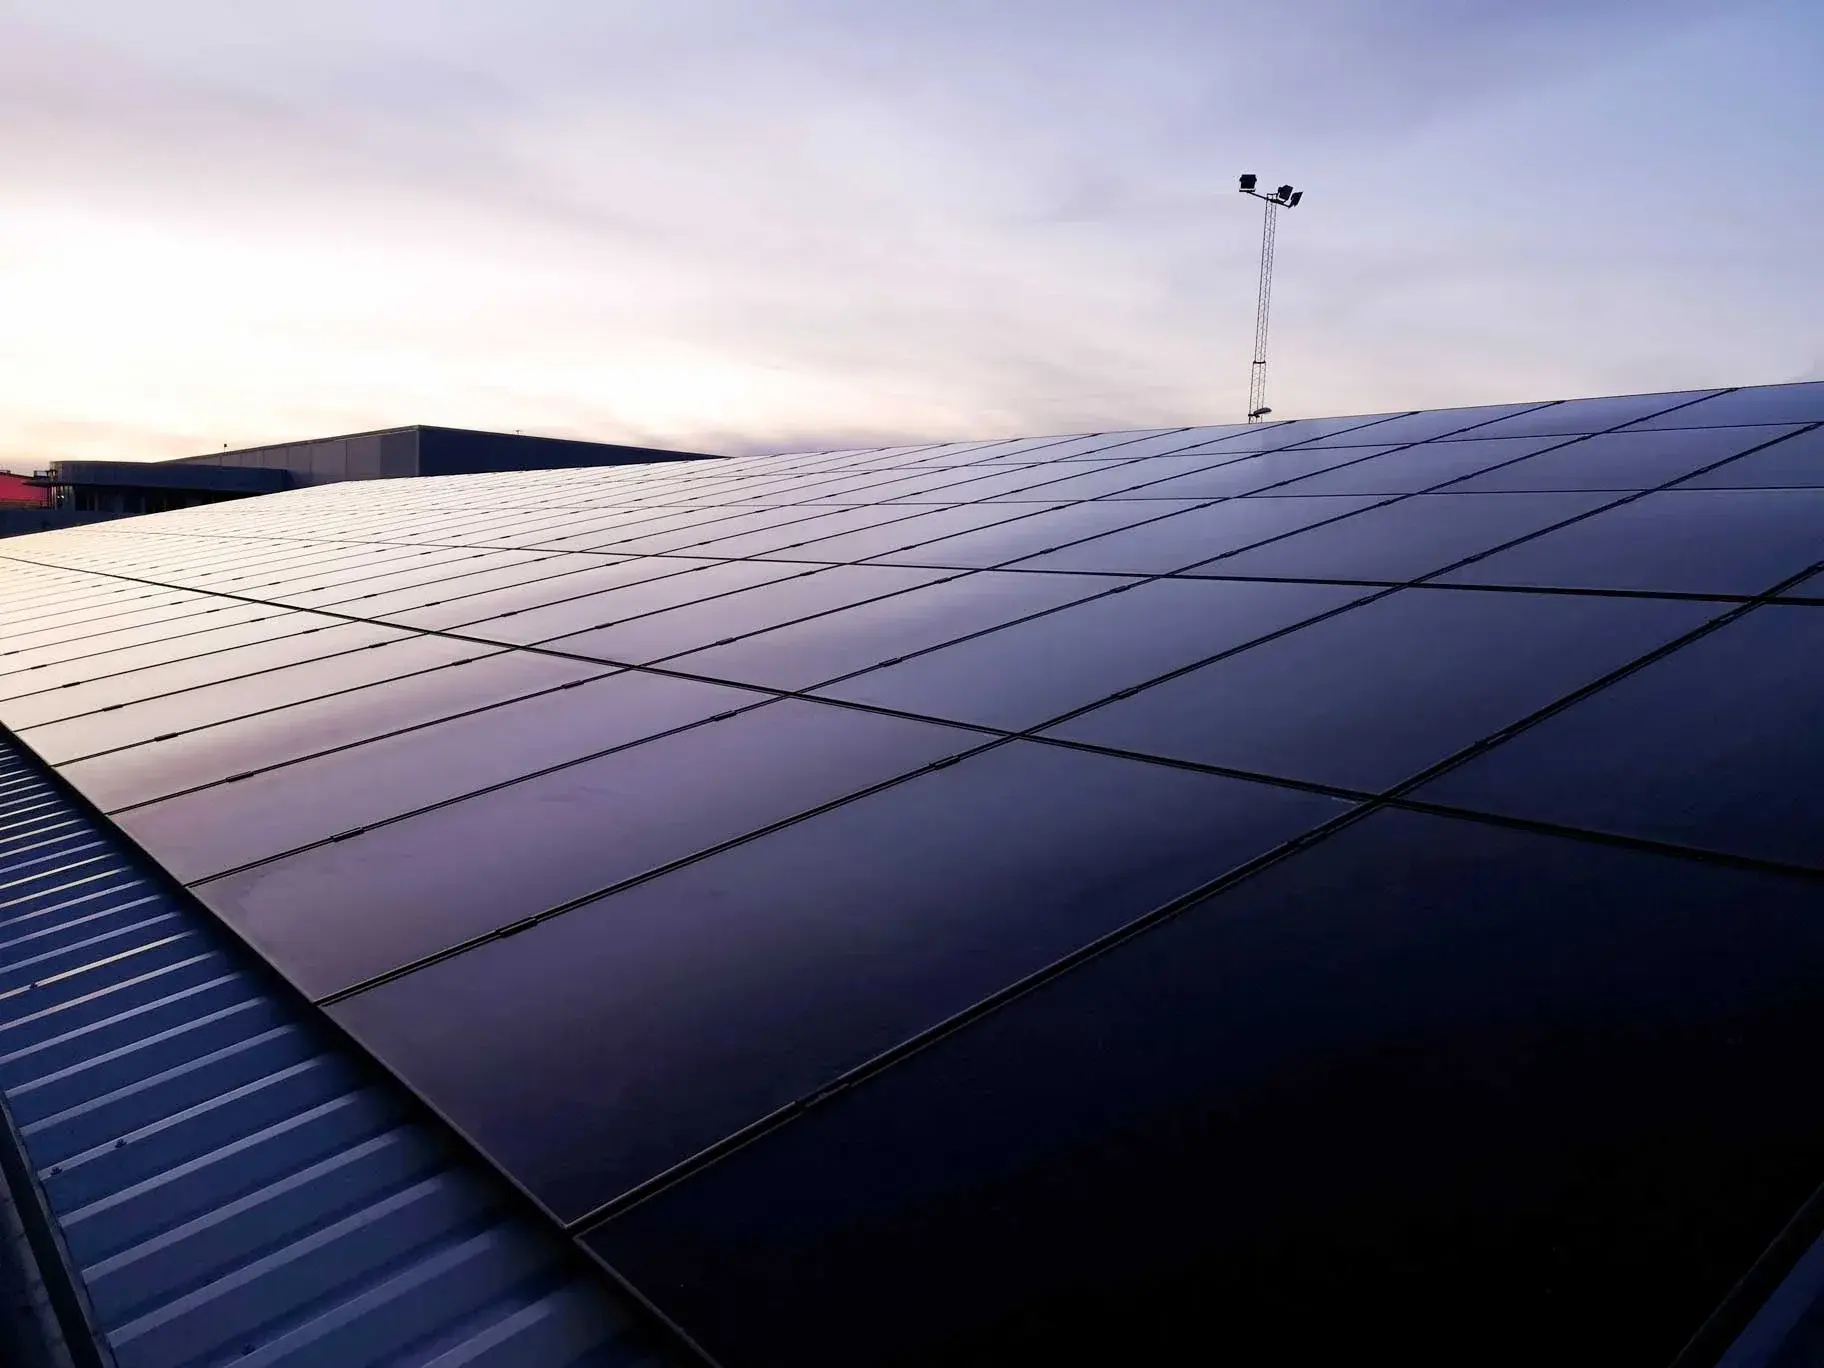 A renewable future with smart solar panels